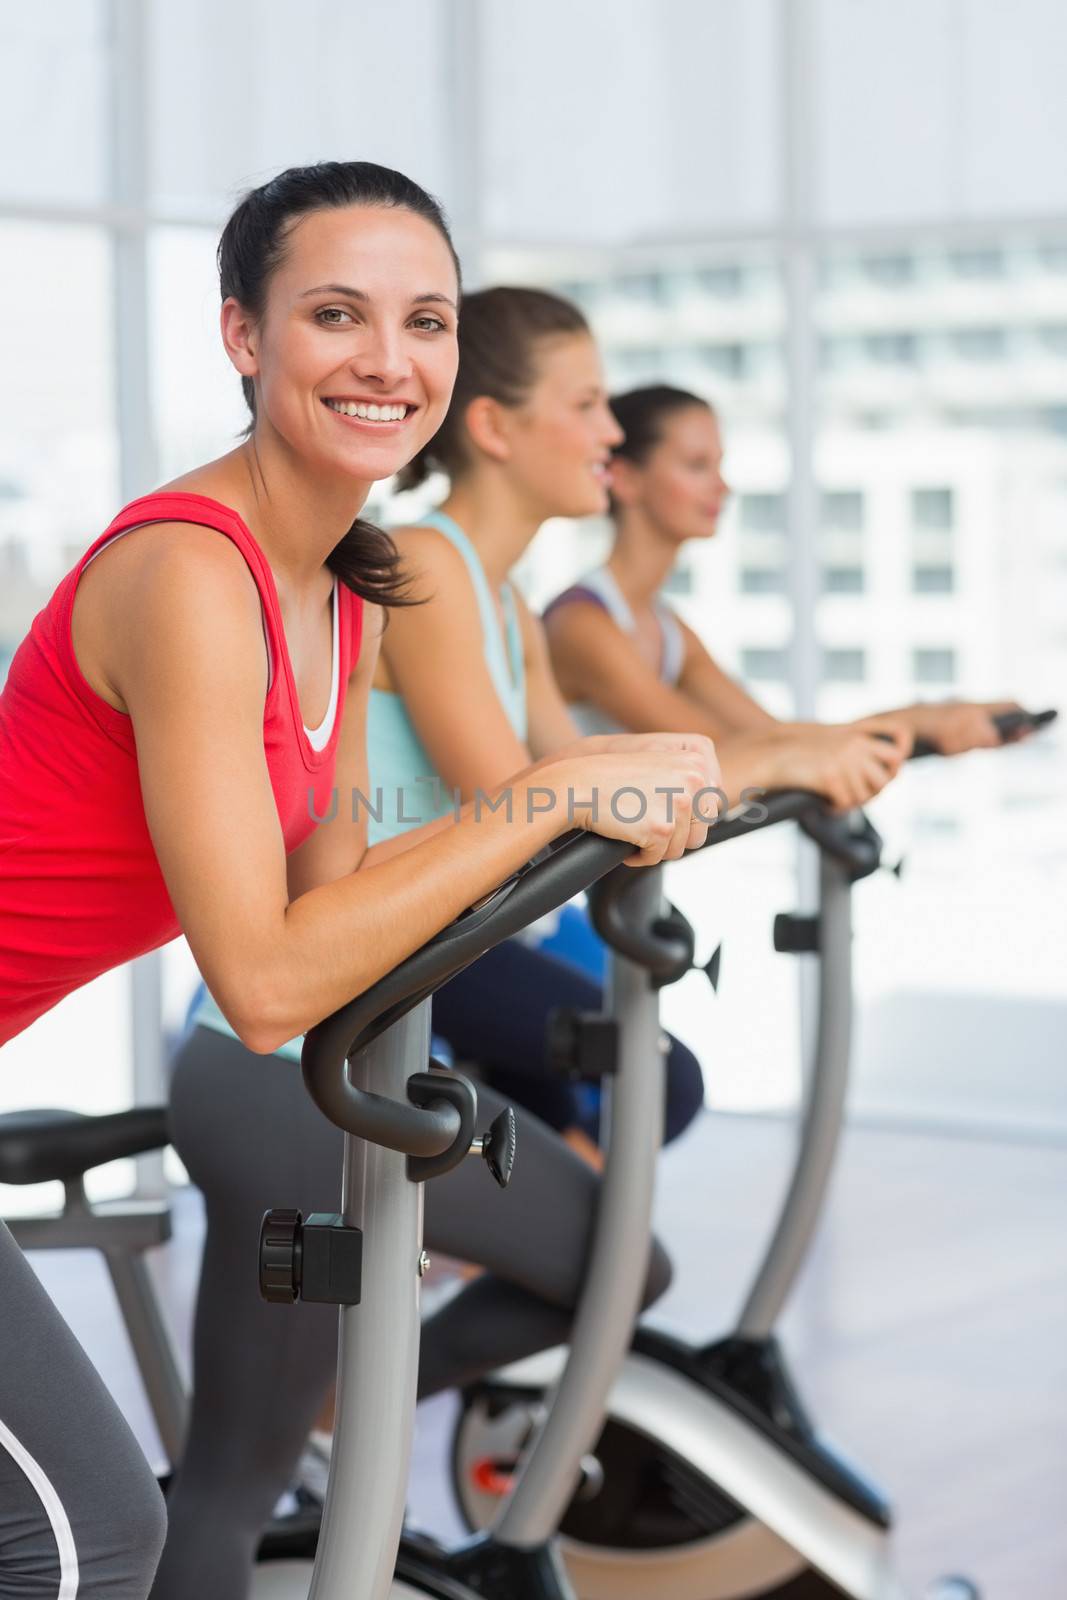 Side view portrait of fit young people working out at spinning class in gym